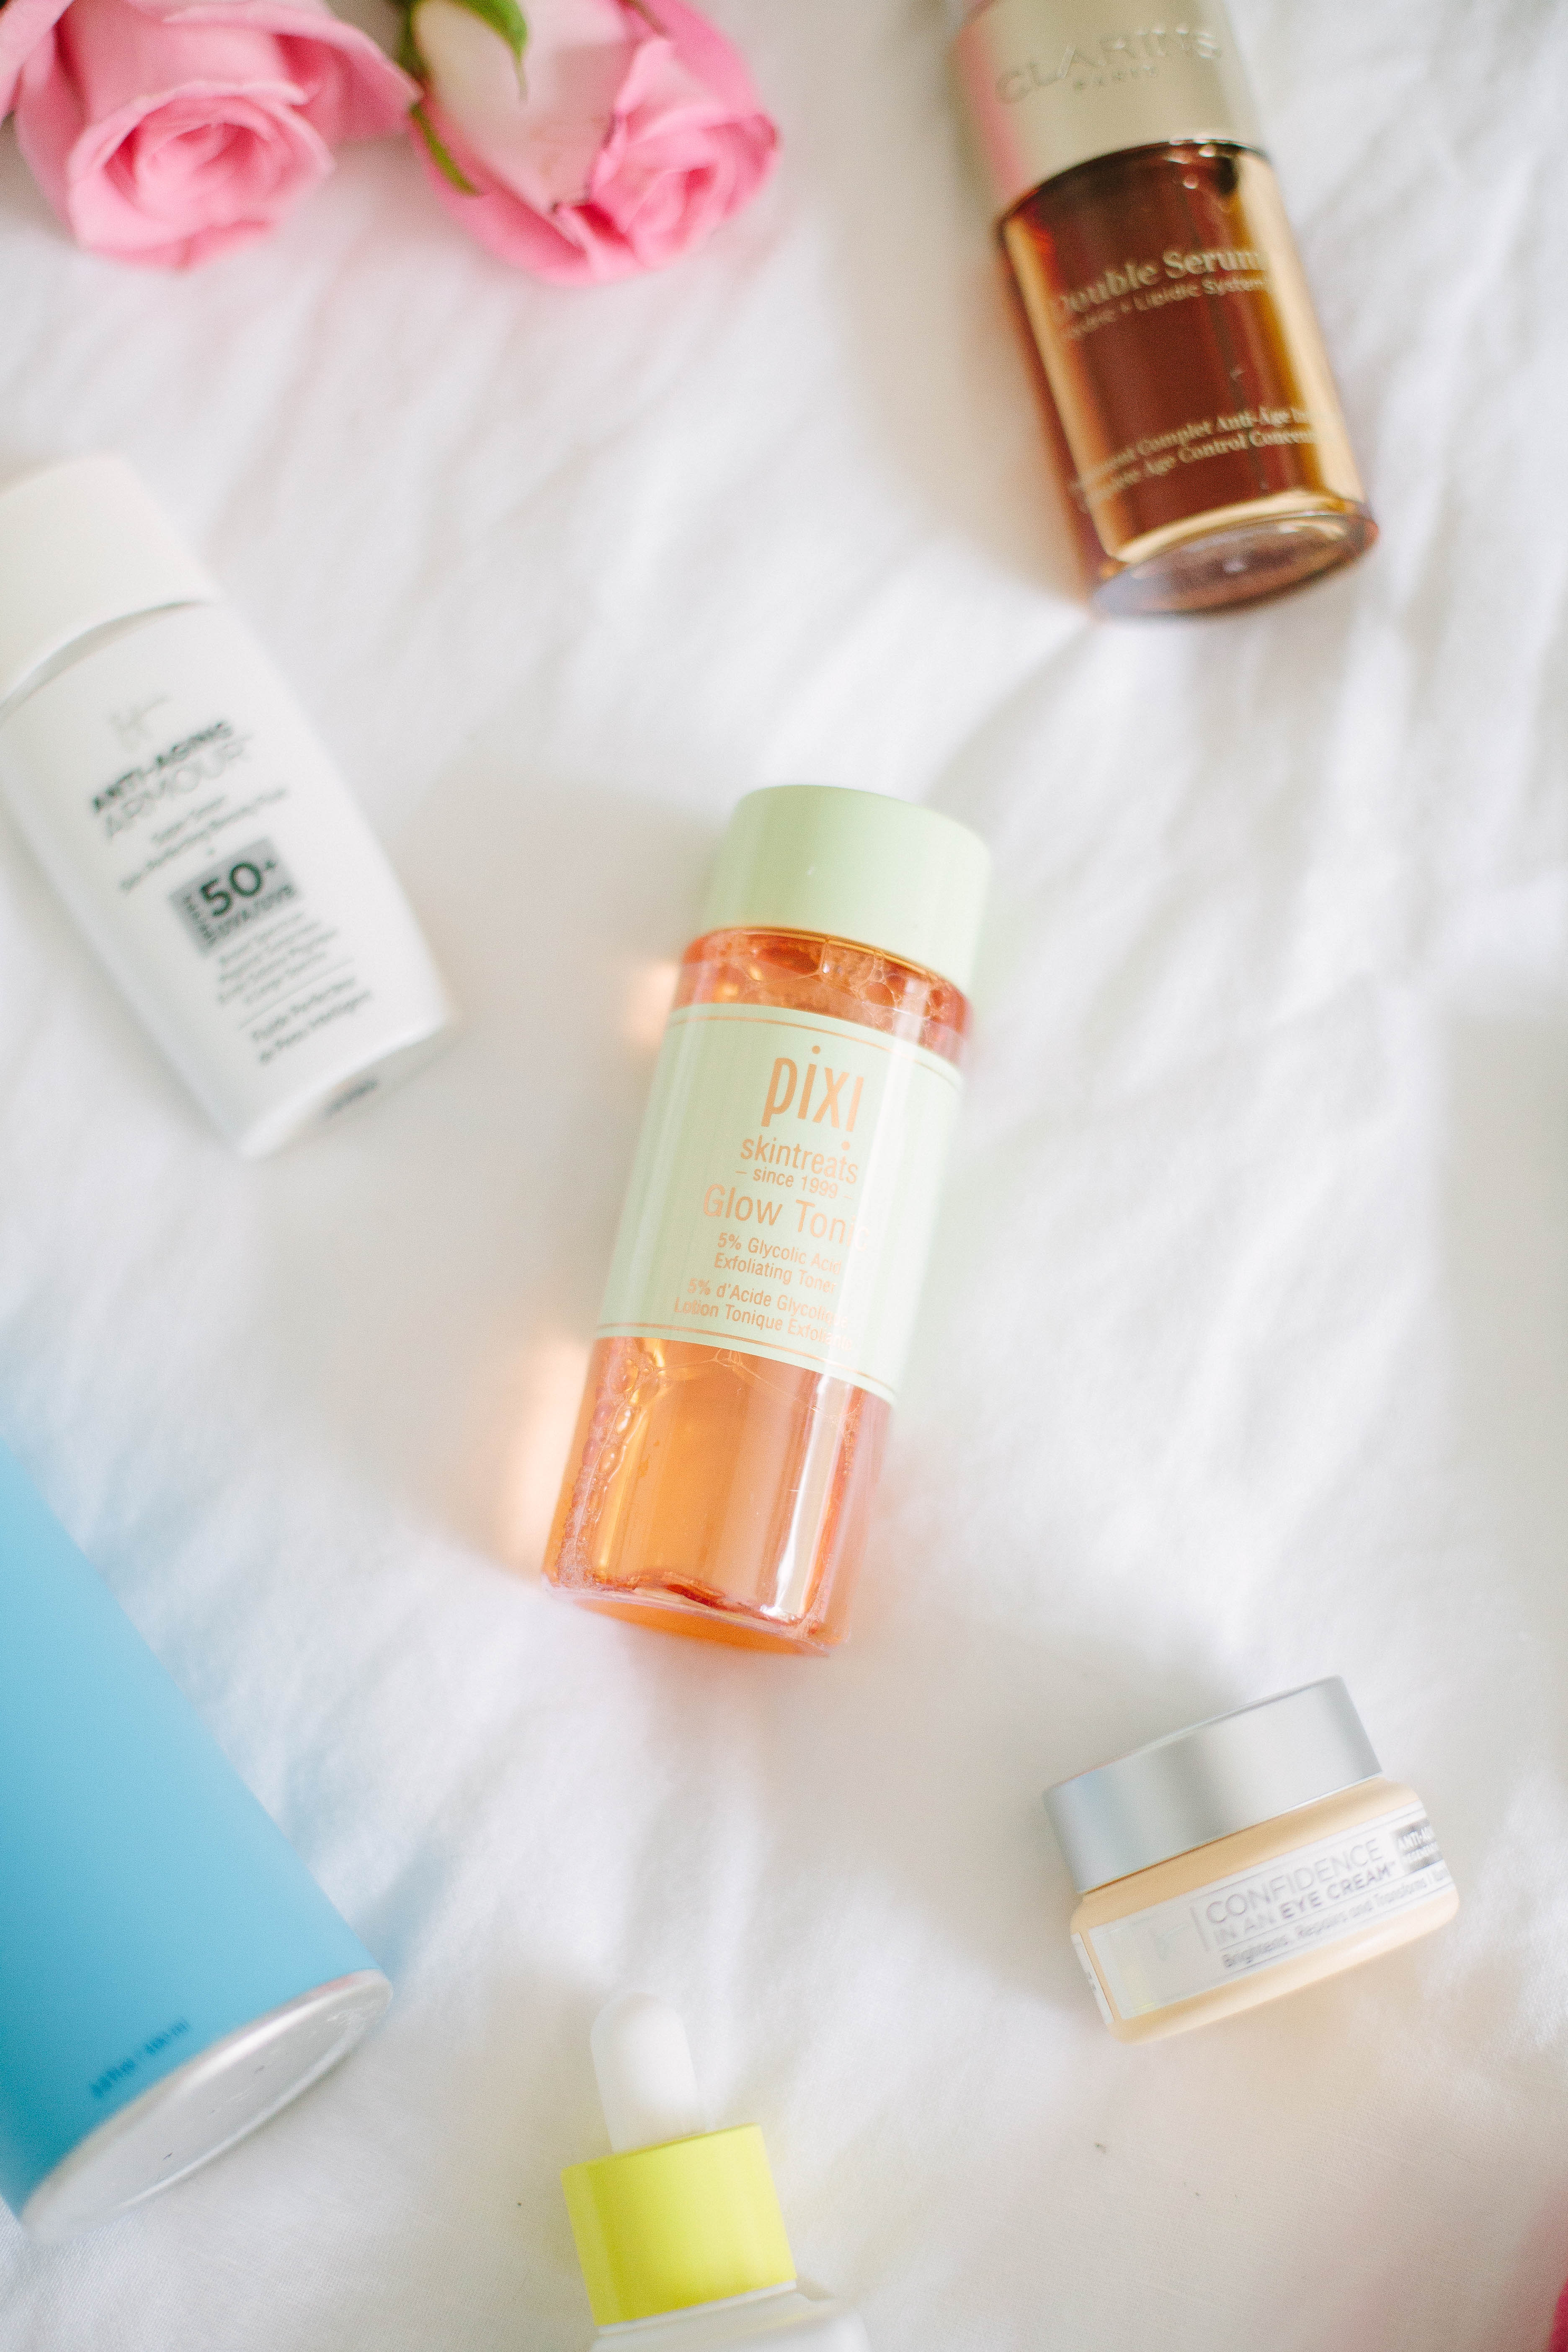 Pregnant and wondering what skincare products are safe to use? Check out this Safe for Pregnancy Skincare Routine and tips on what to look for in products!